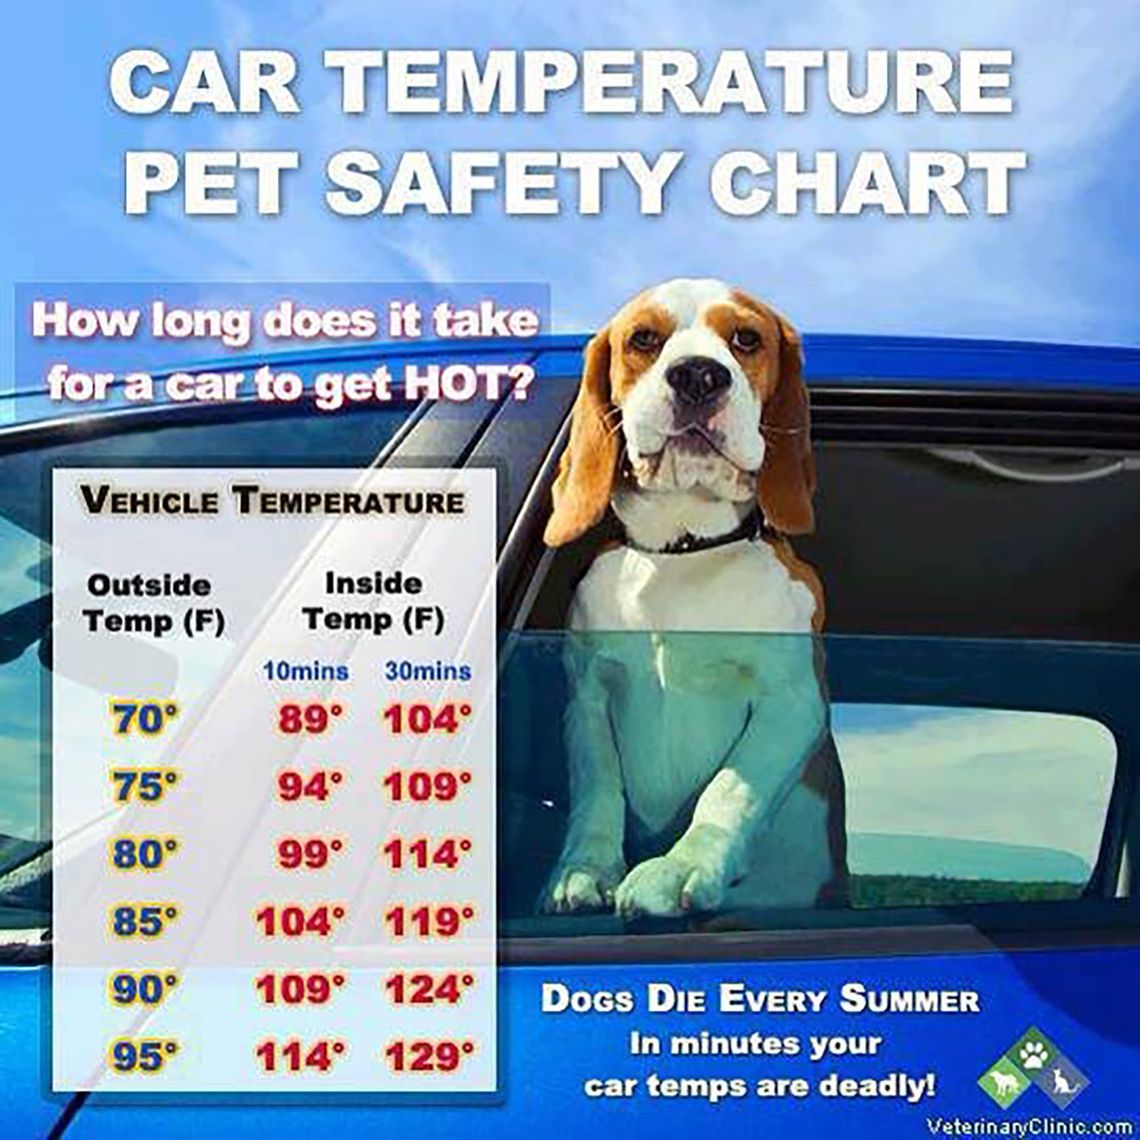 Remember to Protect Your Pets in the Heat